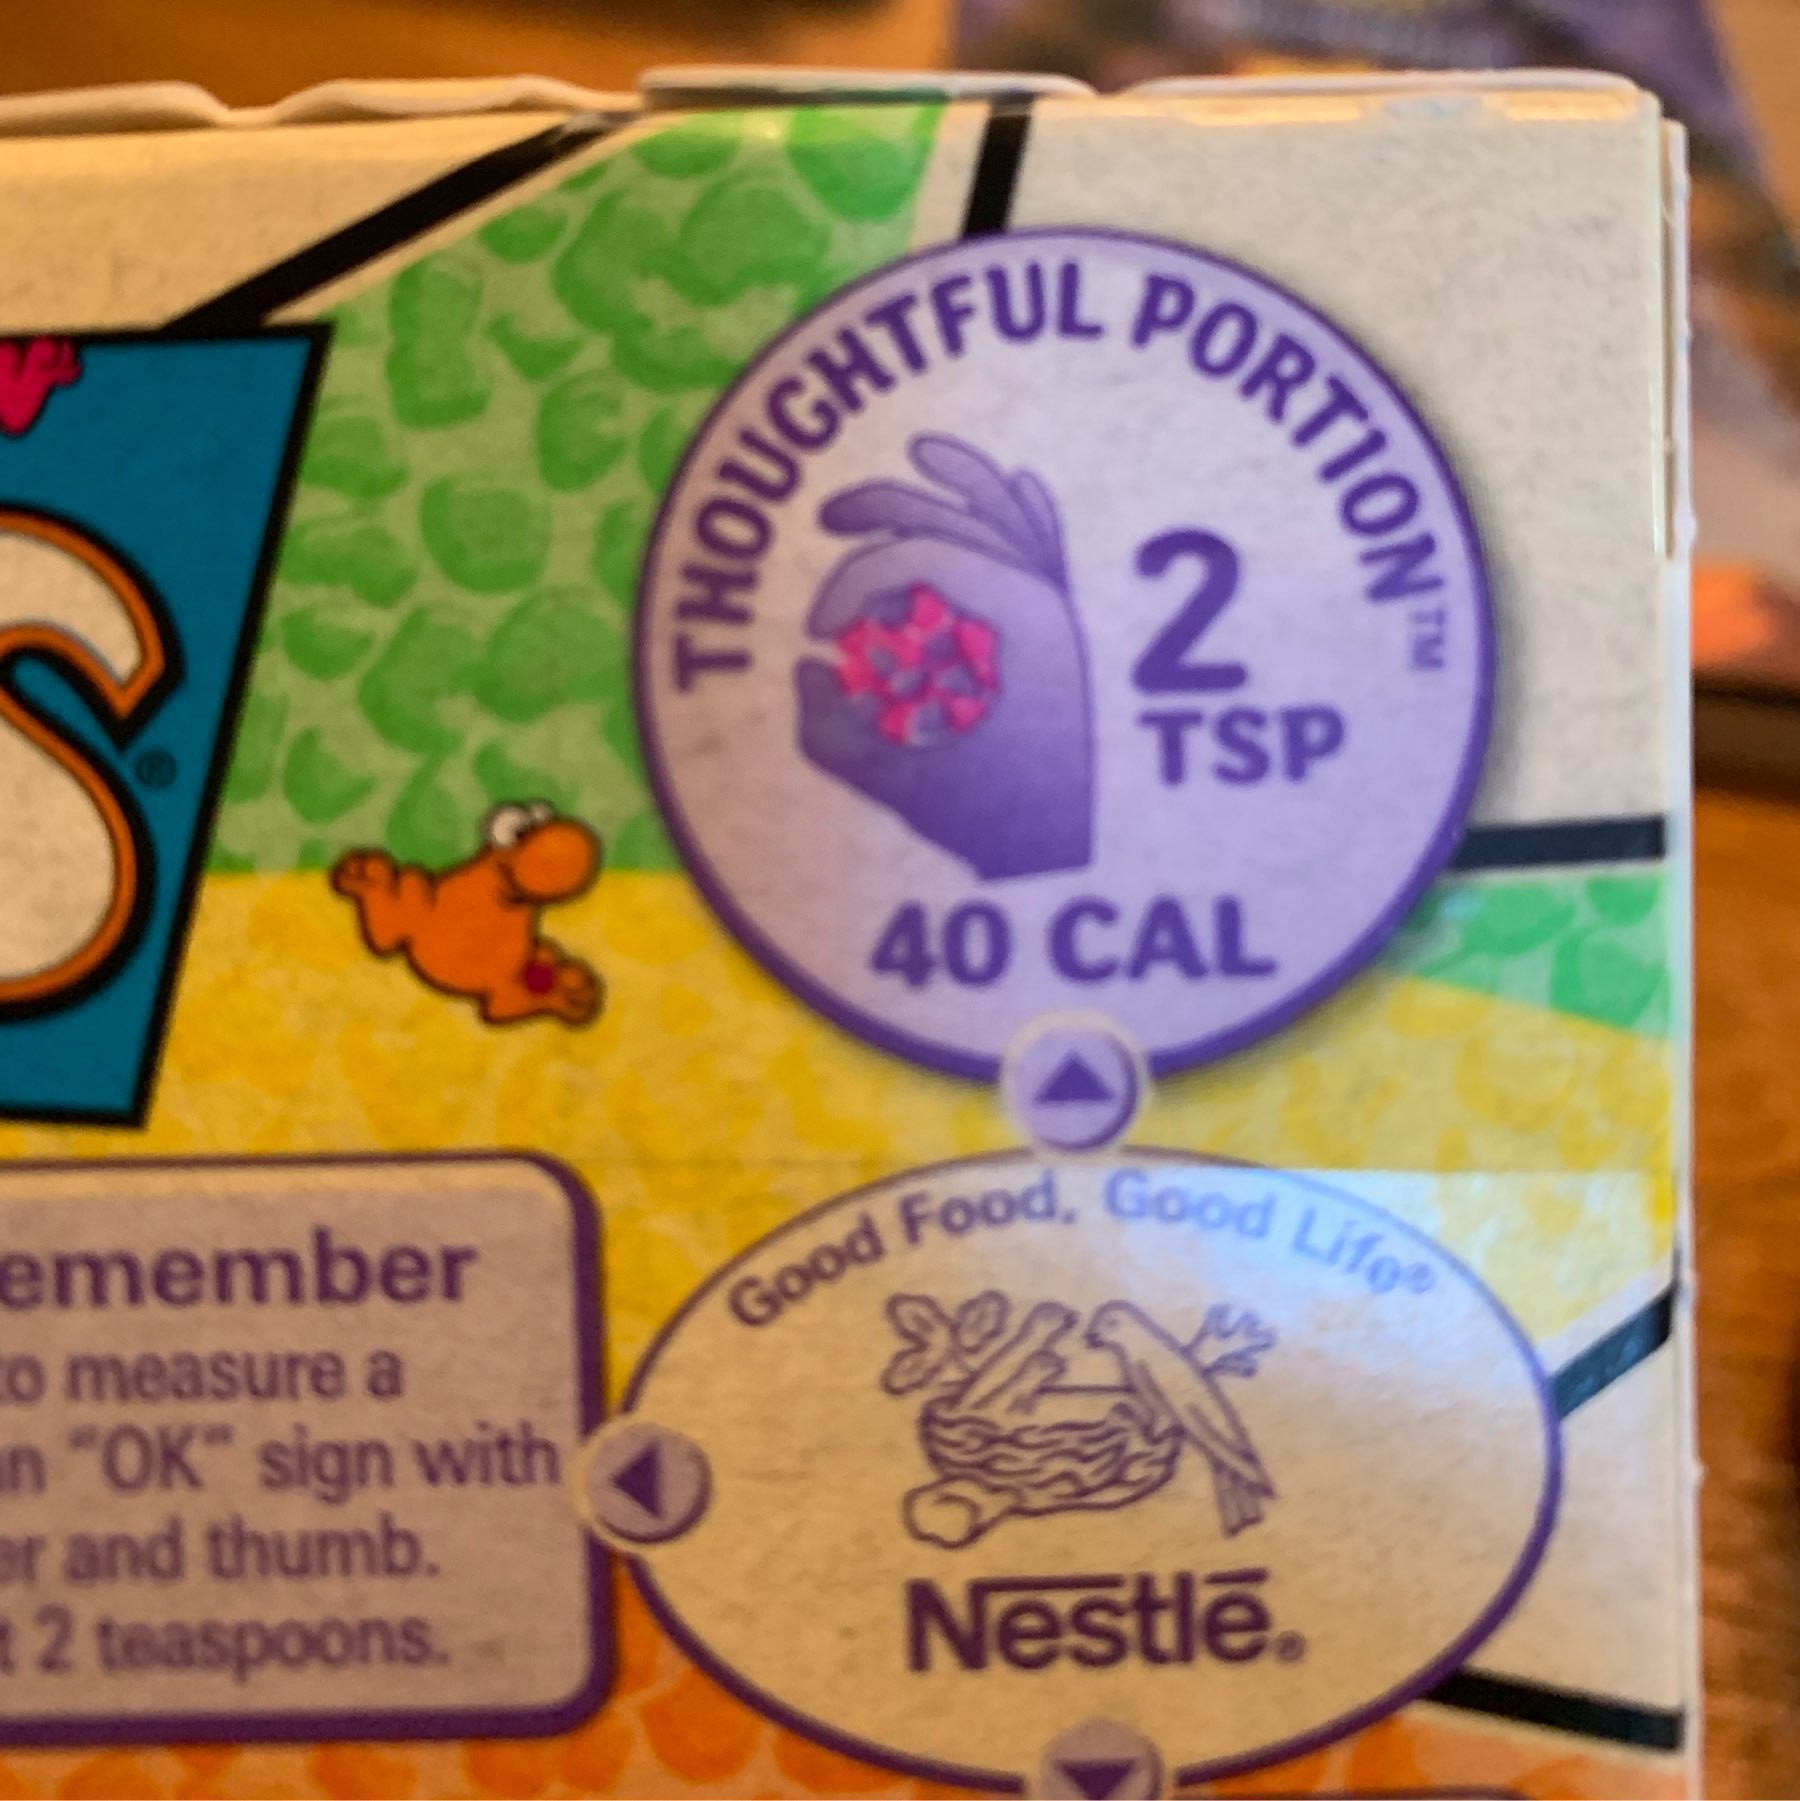 a picture of "A thoughful portion" on a box of Nerds candy. 2 tsp. 